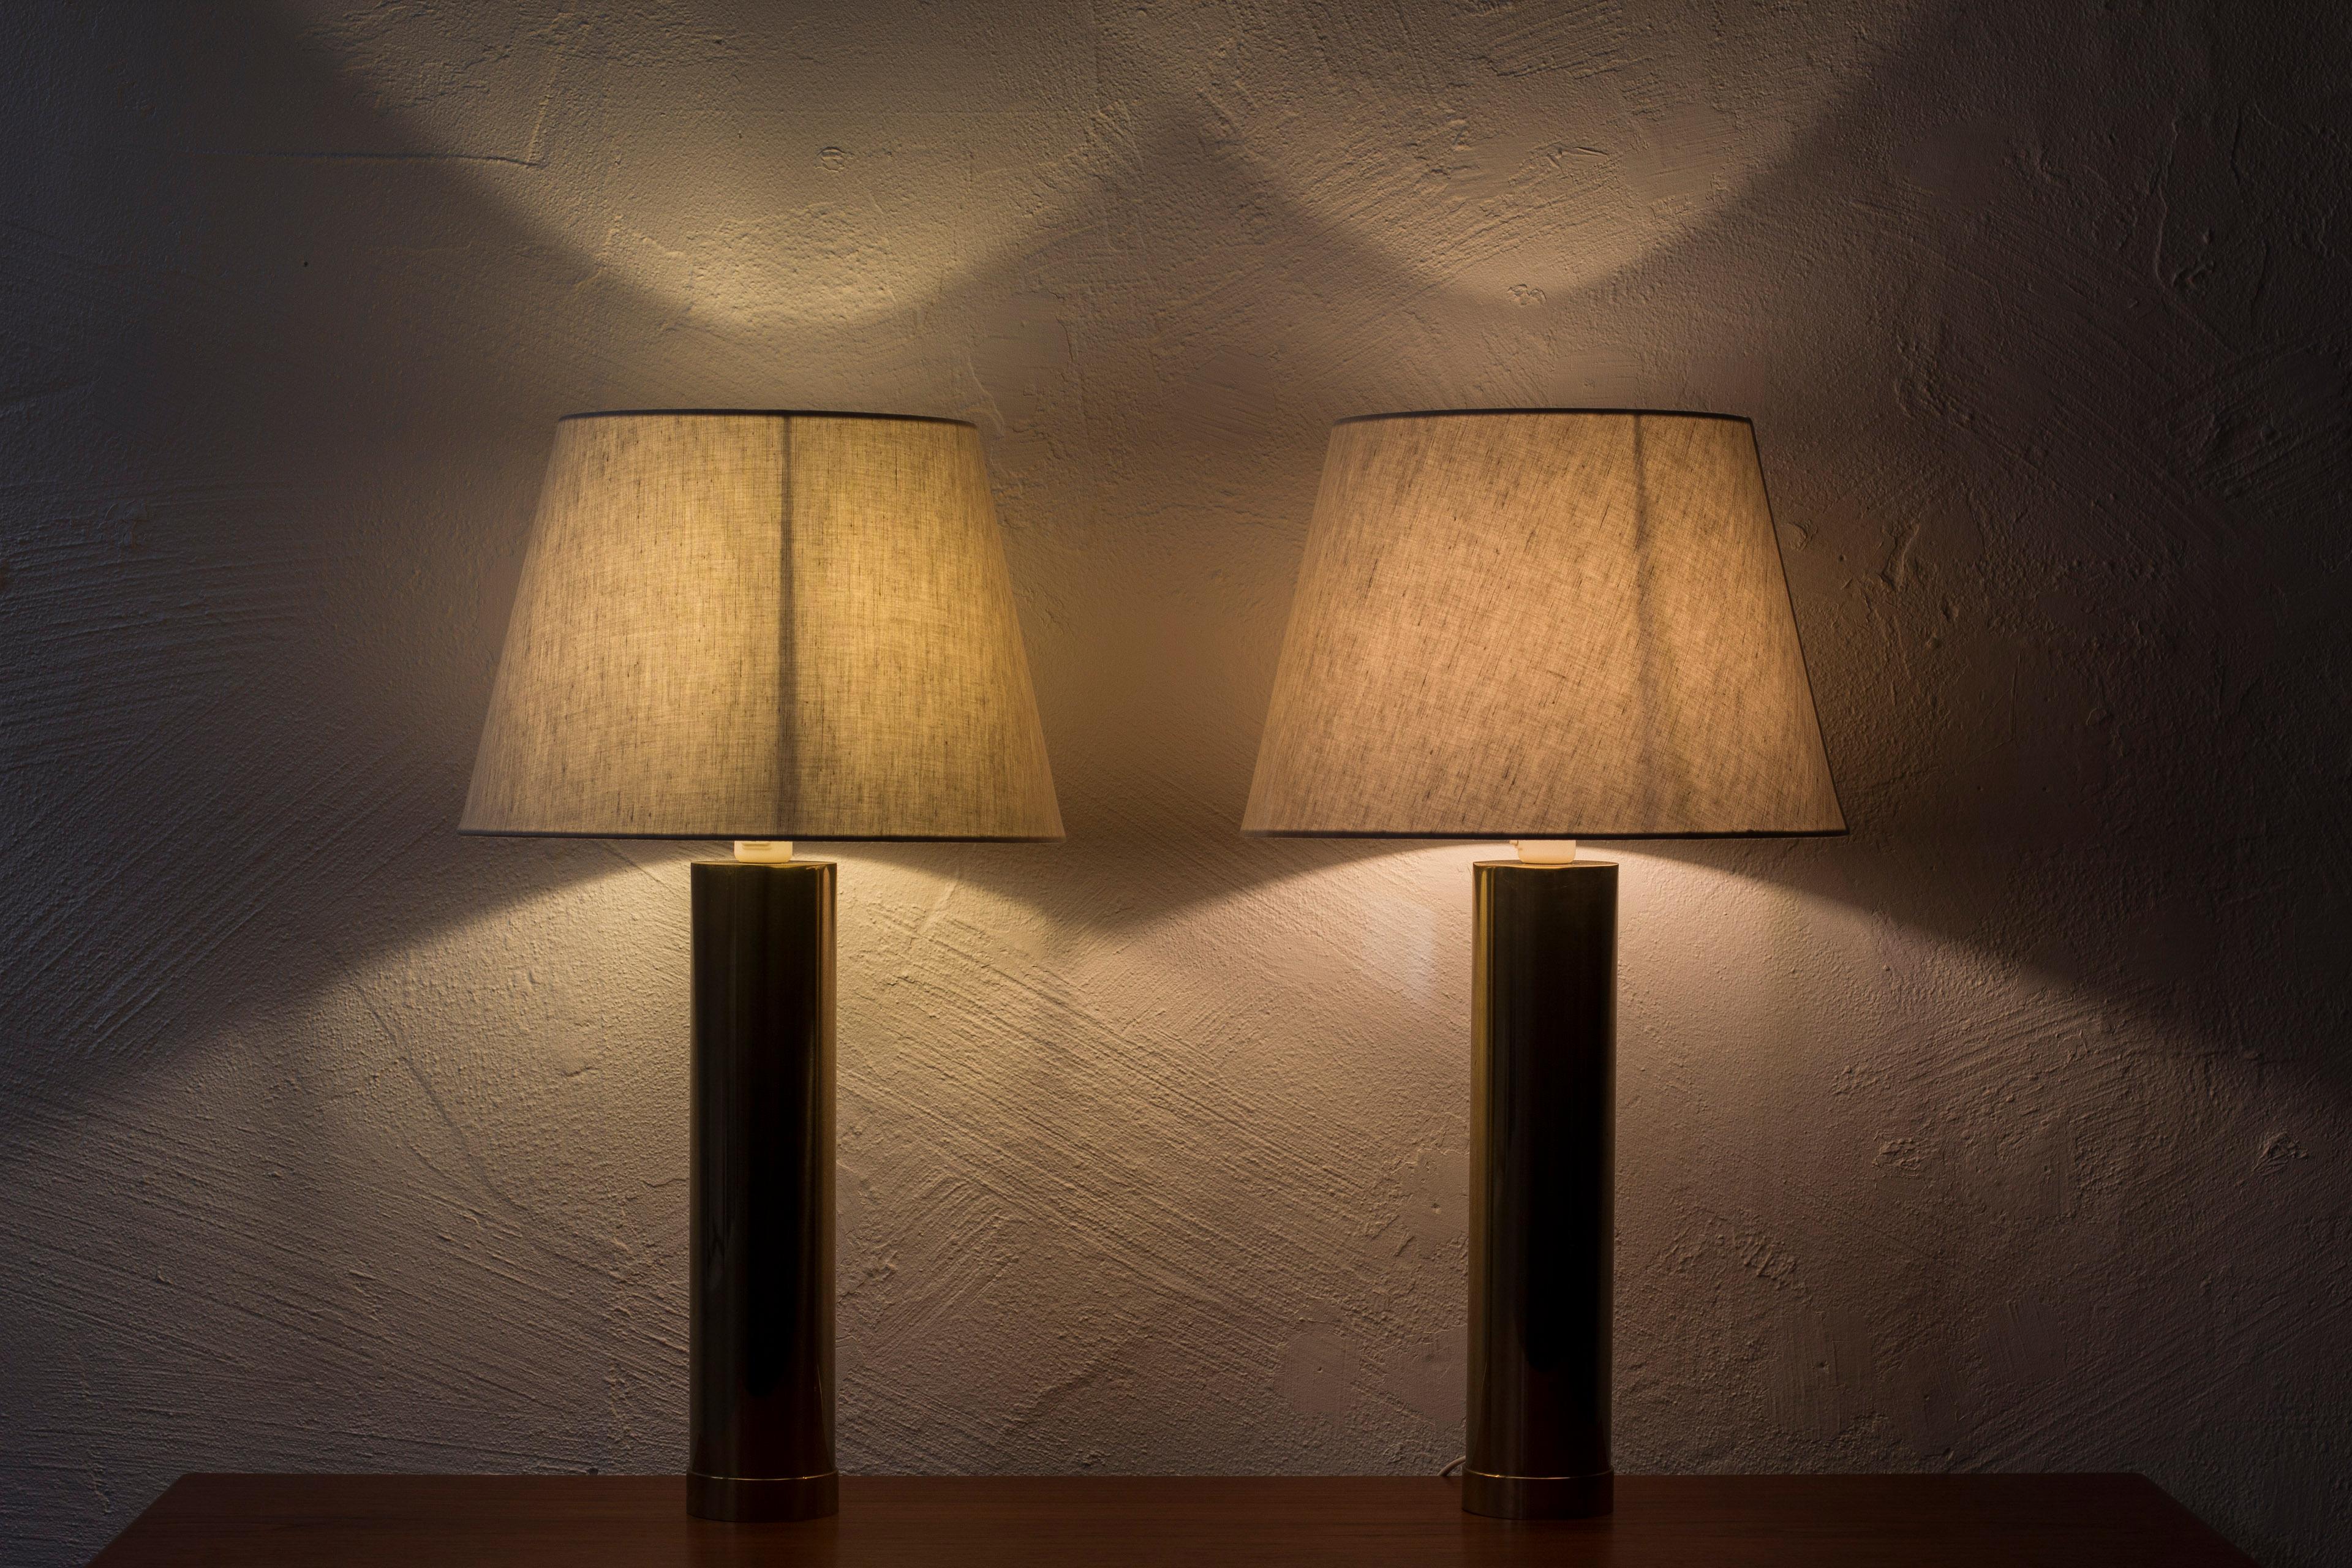 Pair of Brass Table Lamps by Bergboms, Sweden, 1960s, 4 Pcs Total In Good Condition For Sale In Hägersten, SE